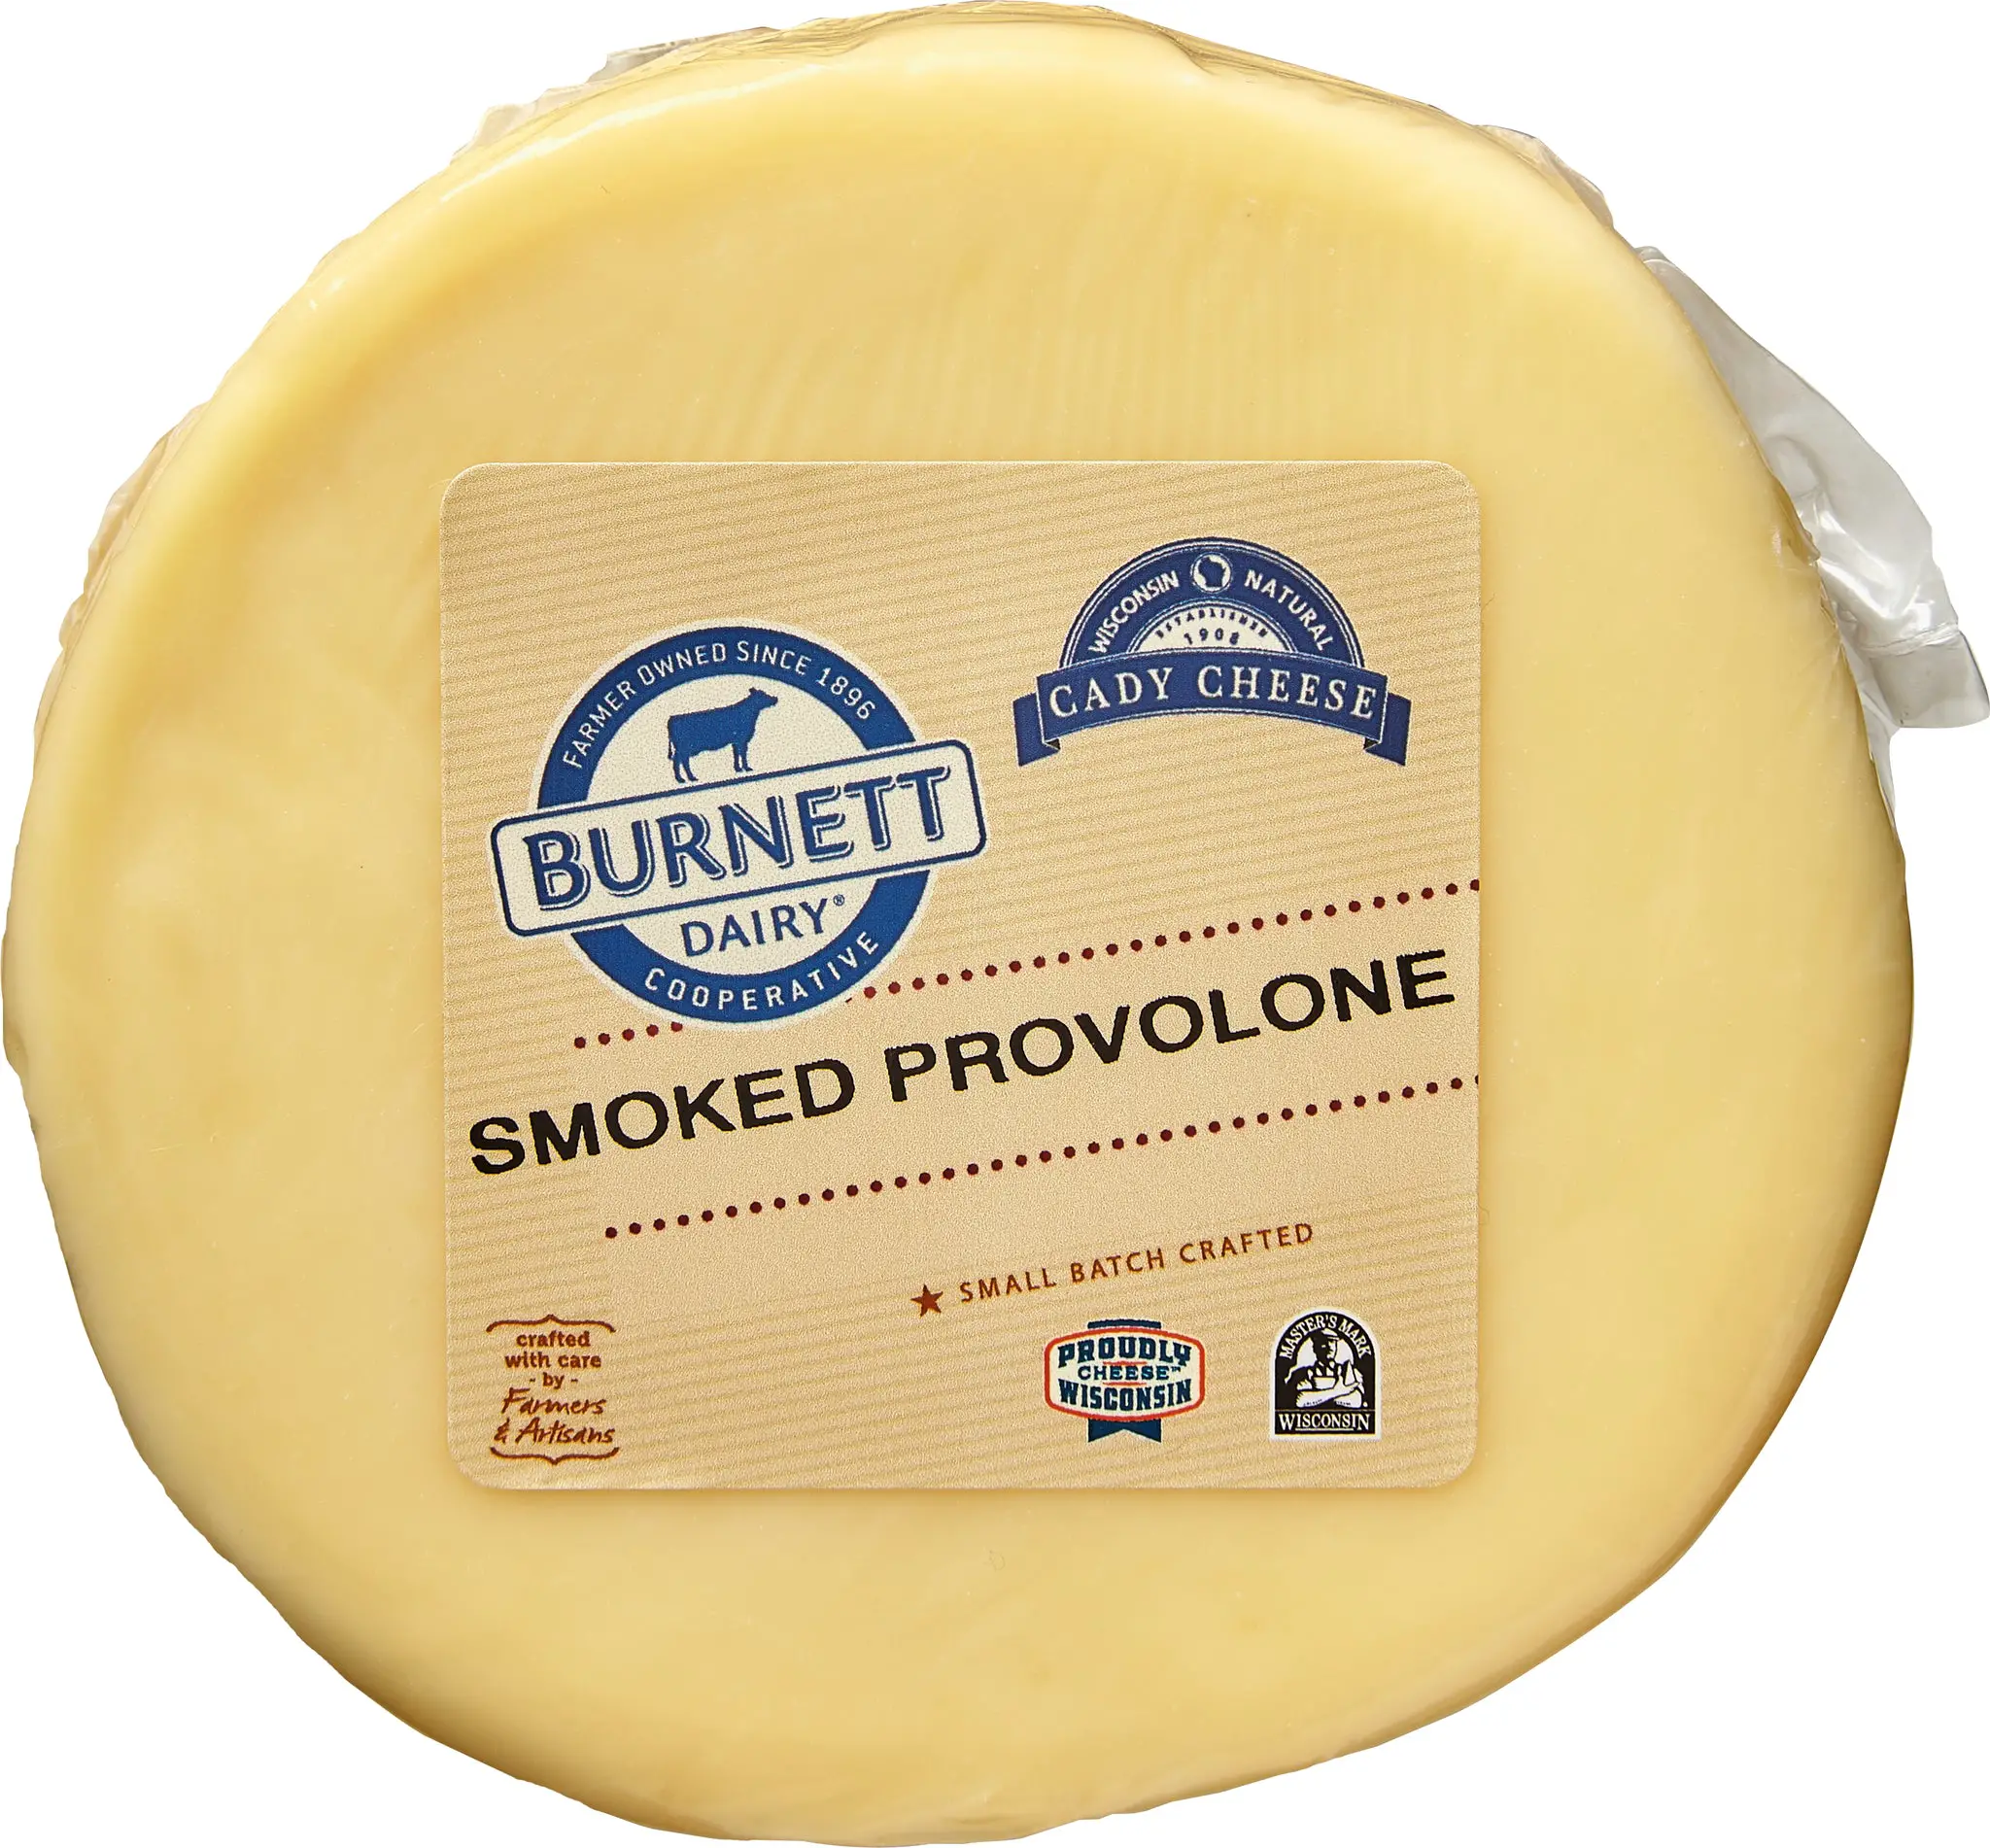 Smoked Provolone  Burnett Dairy and Cady Cheese